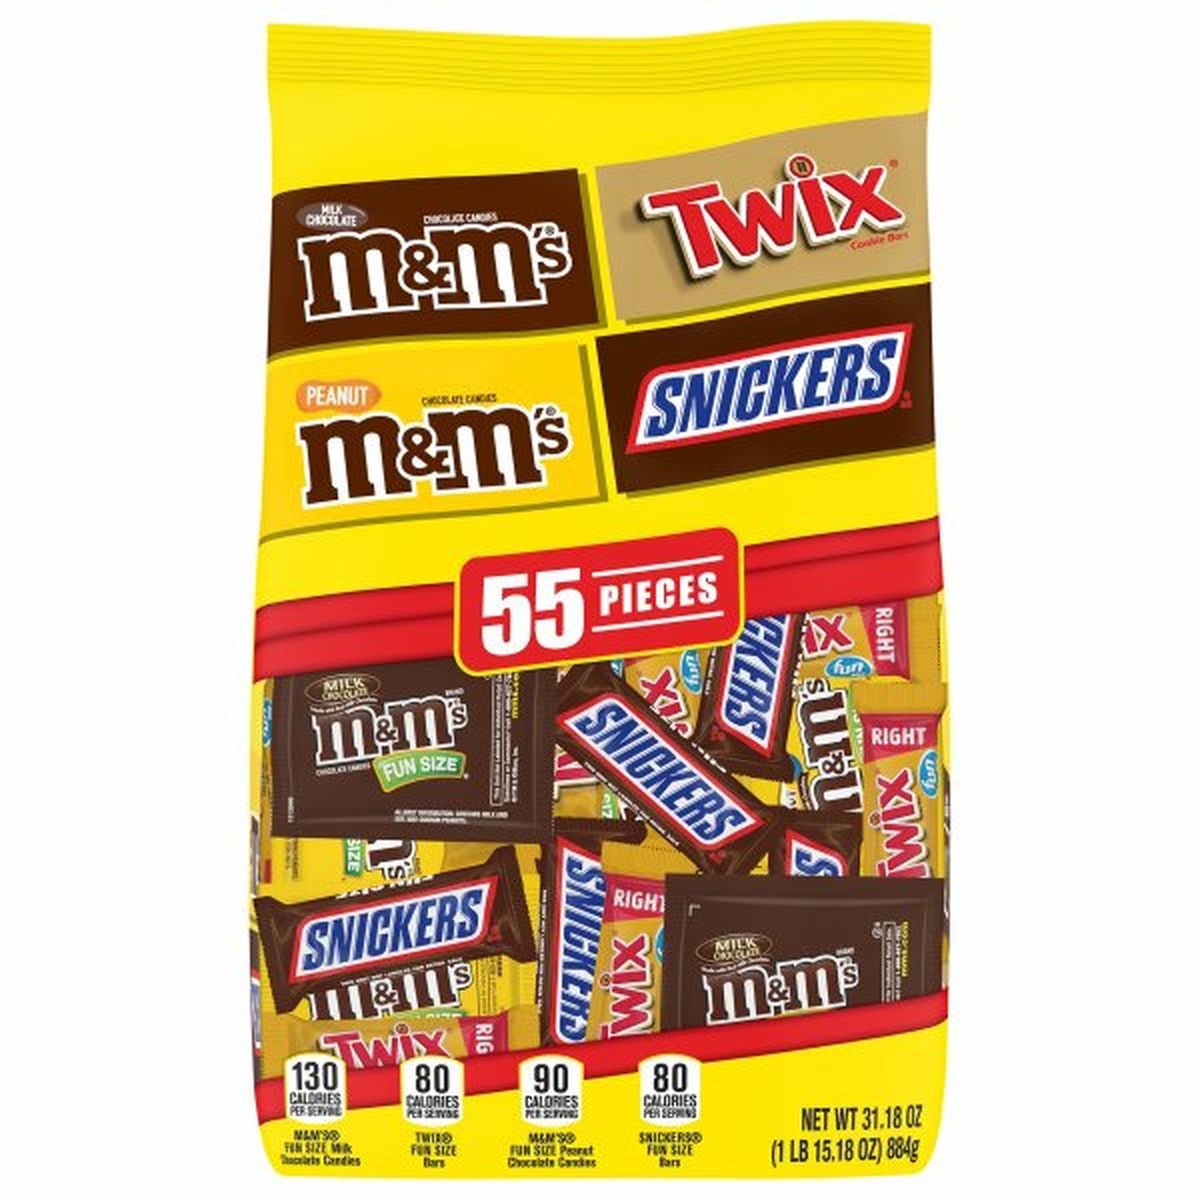 Calories in Snickers, M&m's & Twix Chocolate Candies, Assorted